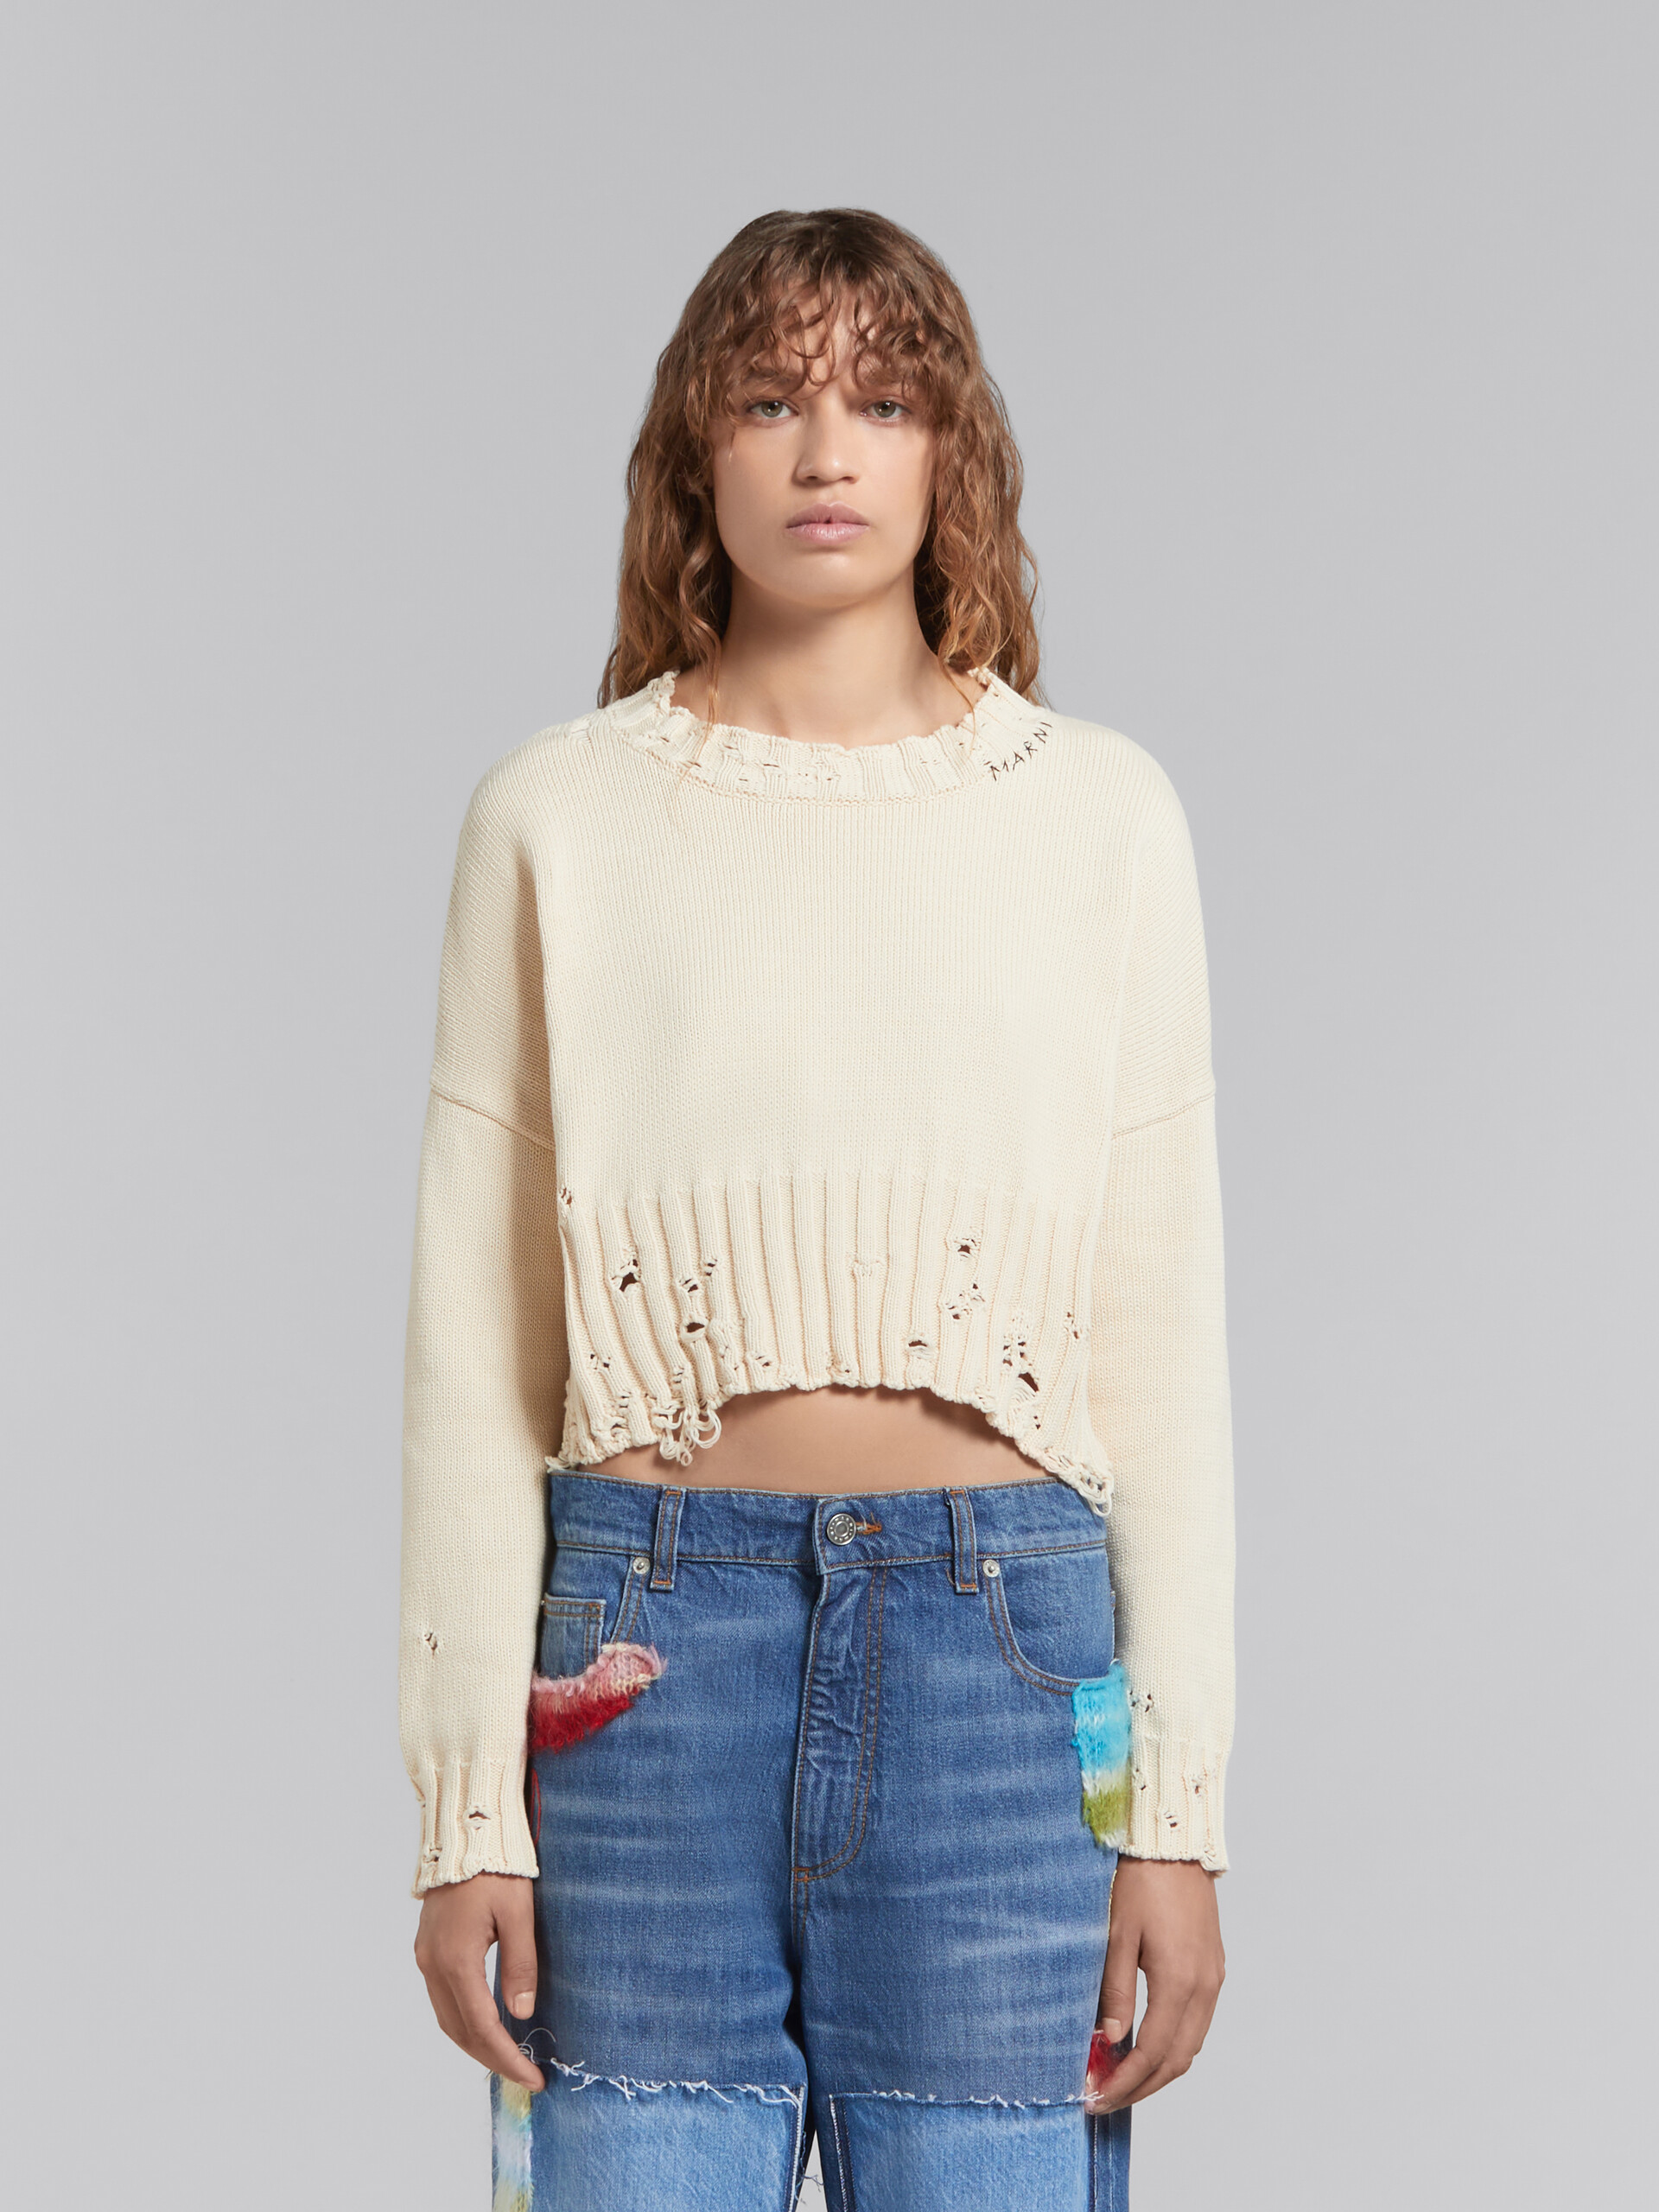 Black dishevelled cotton cropped jumper - Pullovers - Image 2